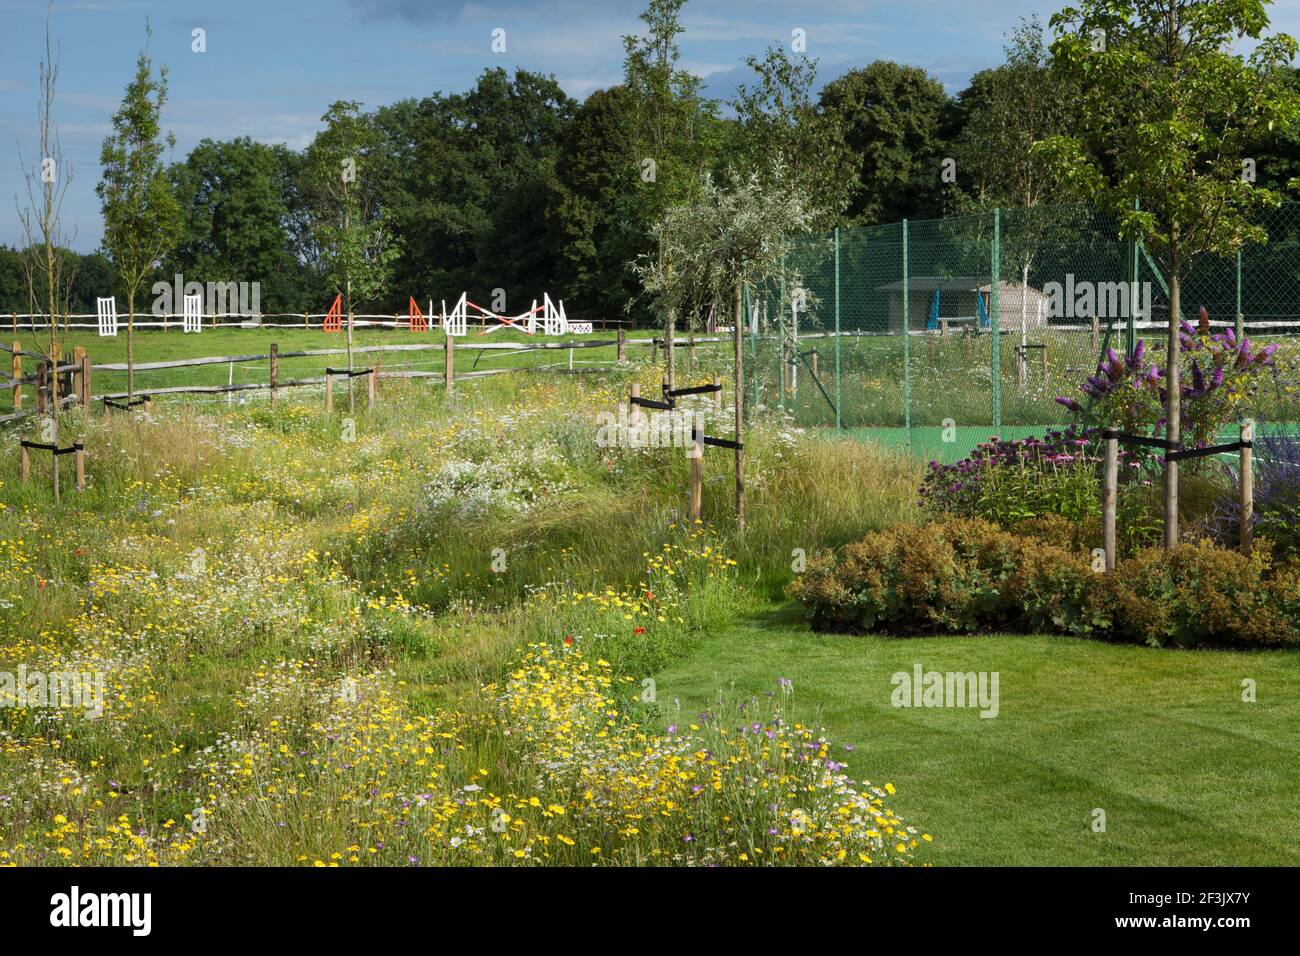 The wildflower meadow adjacent to the main lawn and tennis court with horse-jumping equipment in paddock beyond. Meadow planted with Agrostemma githag Stock Photo